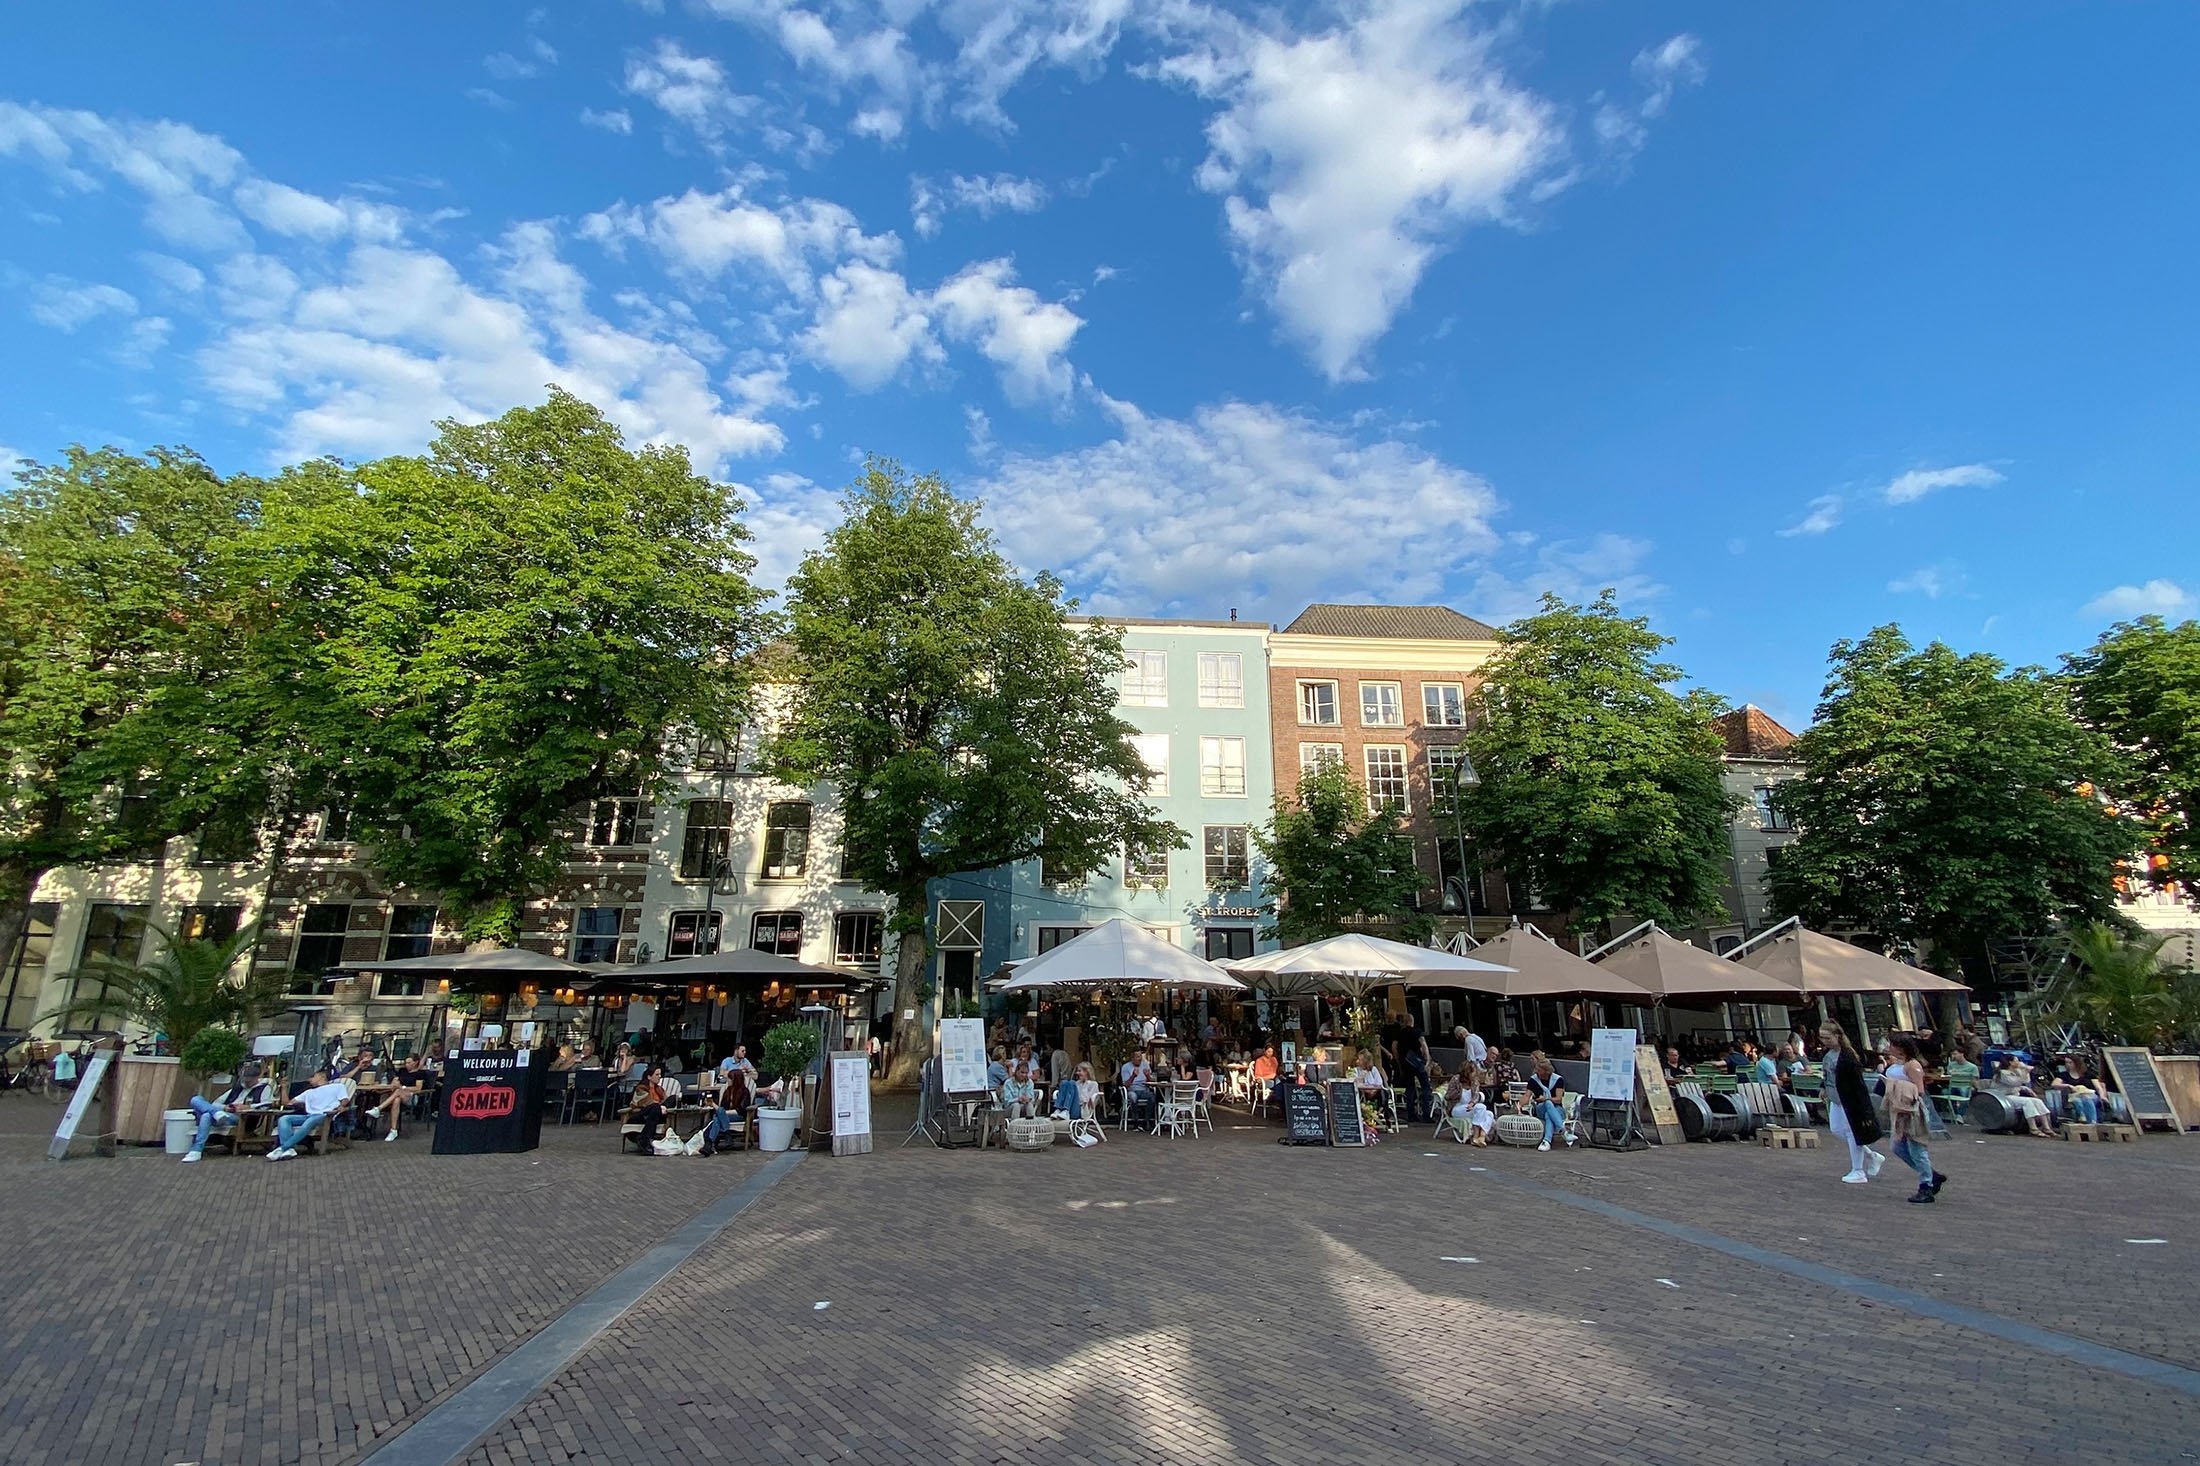 Outside dining areas on the central square of Deventer fill up with people having a good time when the weather